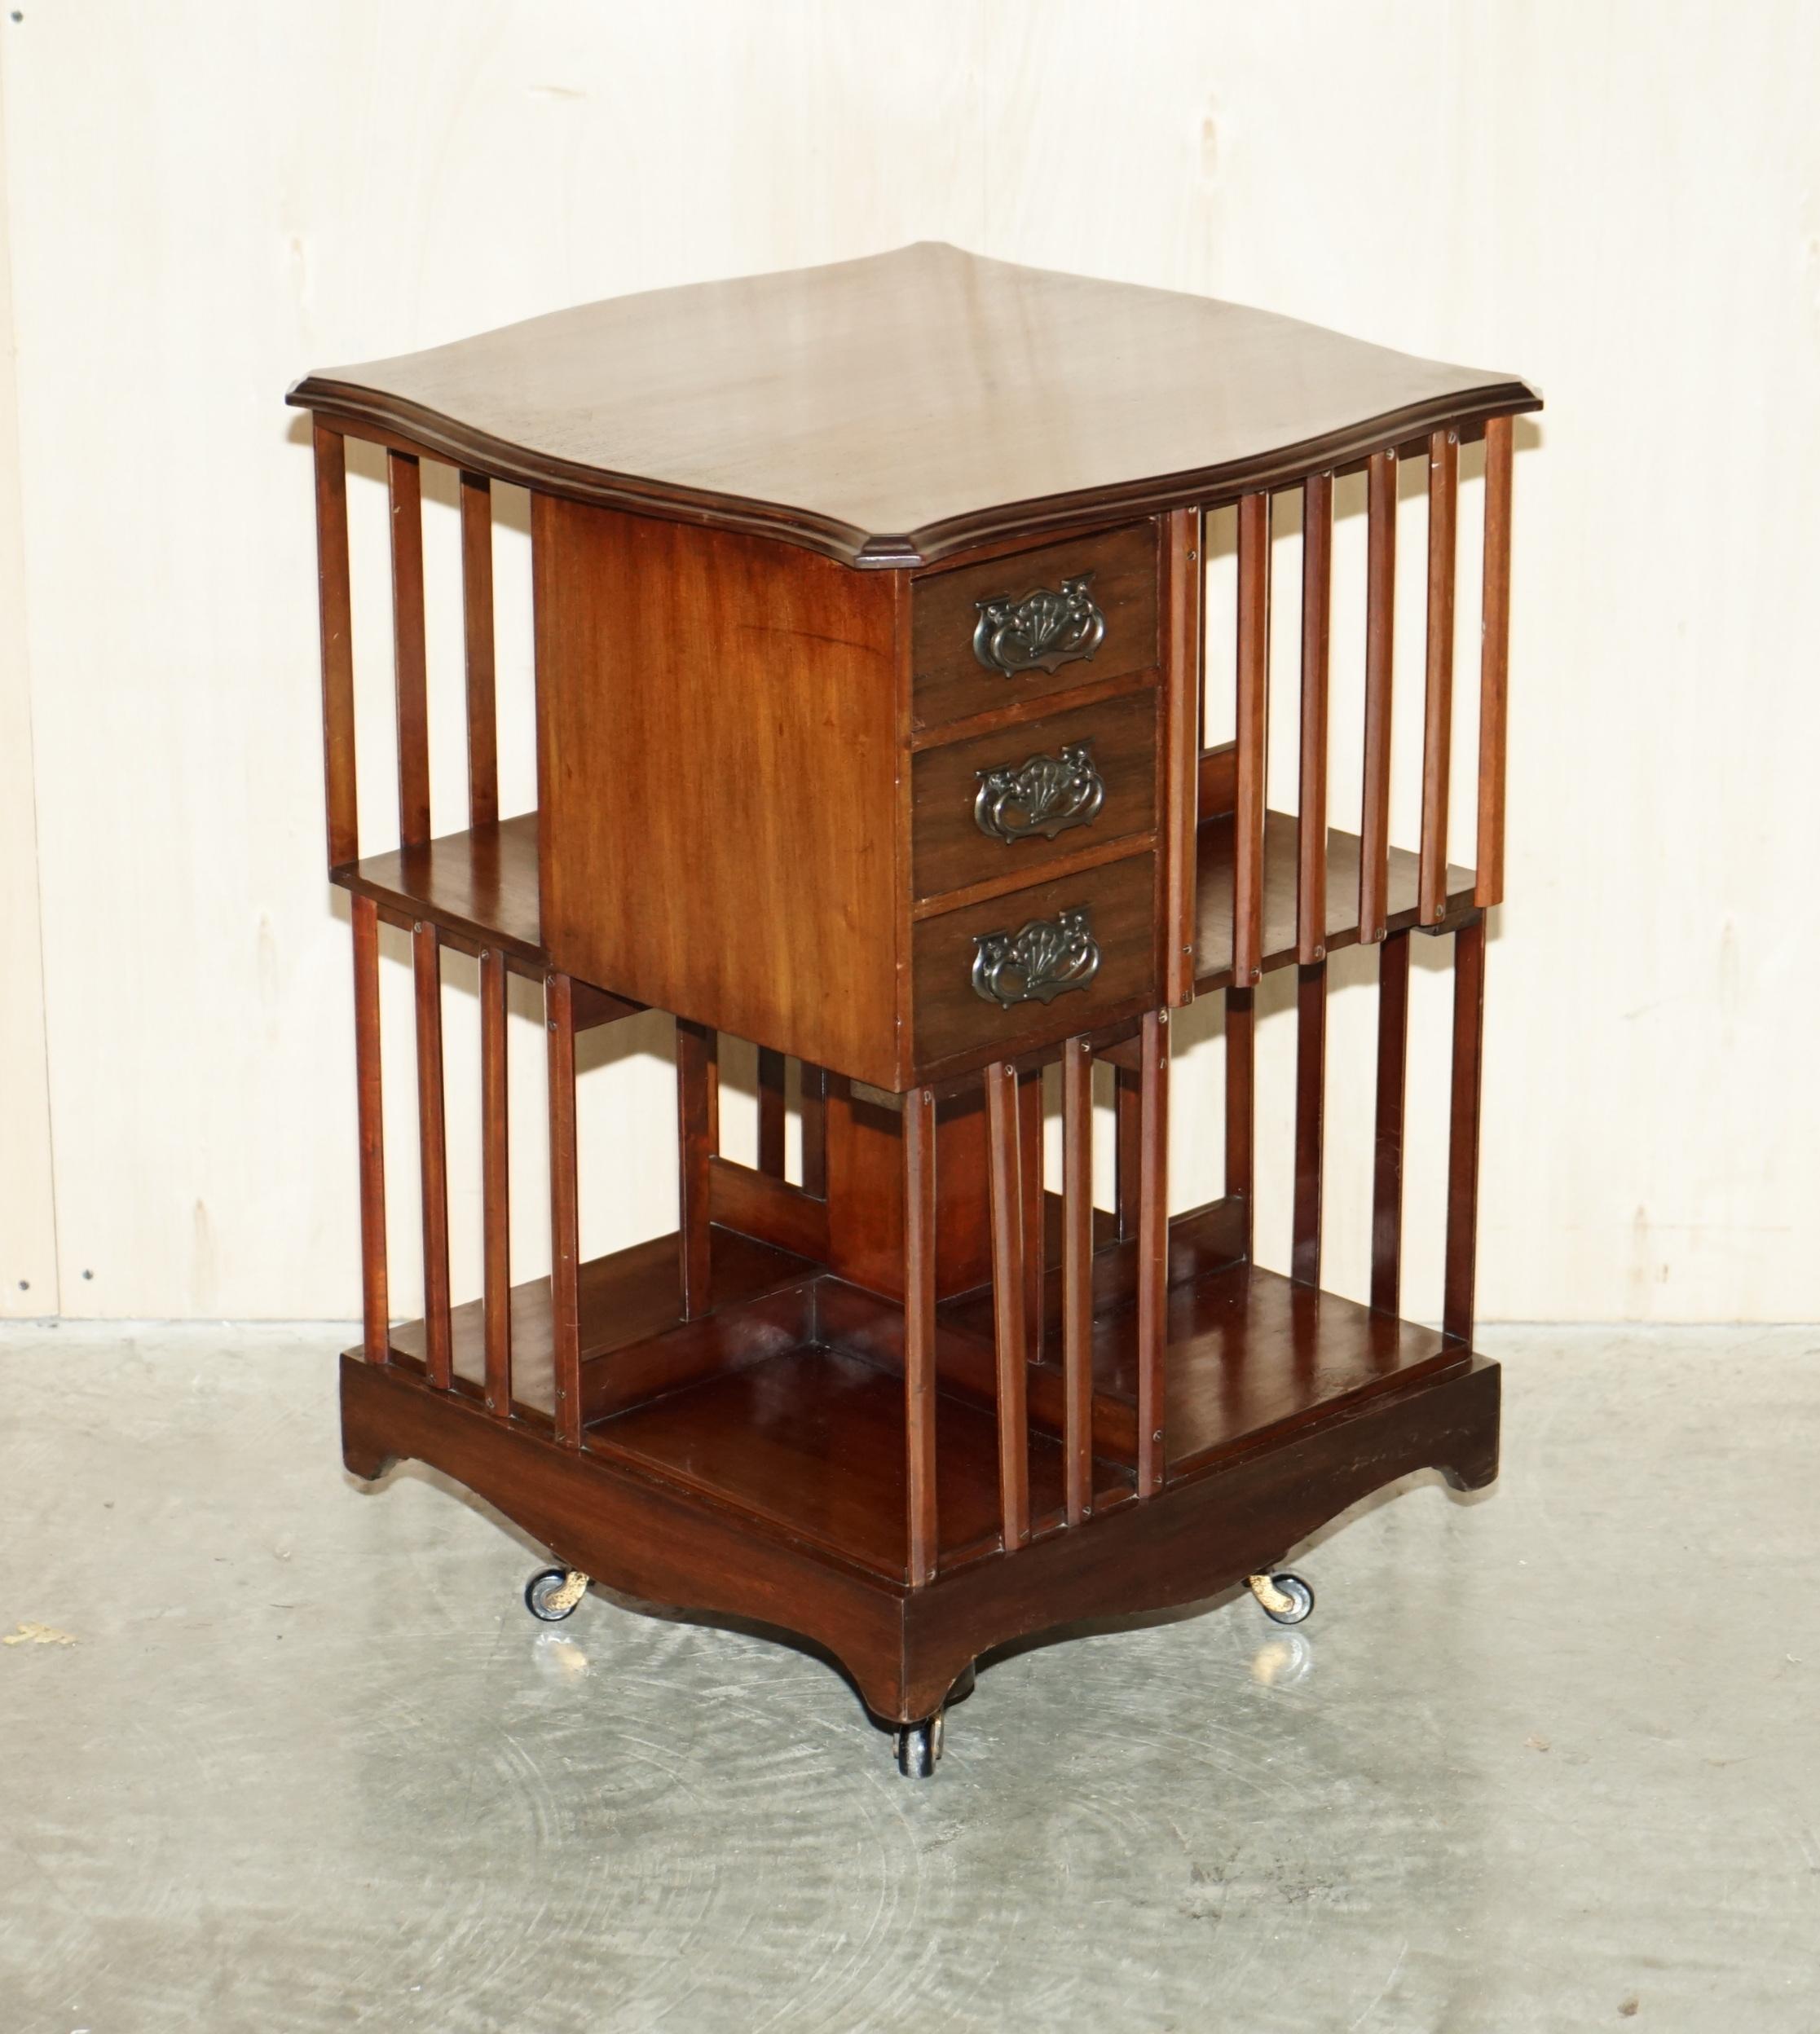 We are delighted to offer for sale this exhibition quality Liberty's London style English Mahogany, circa 1880 revolving bookcase table with serpentine top and very rare small drawer section 

A good looking and well made piece, this is the first